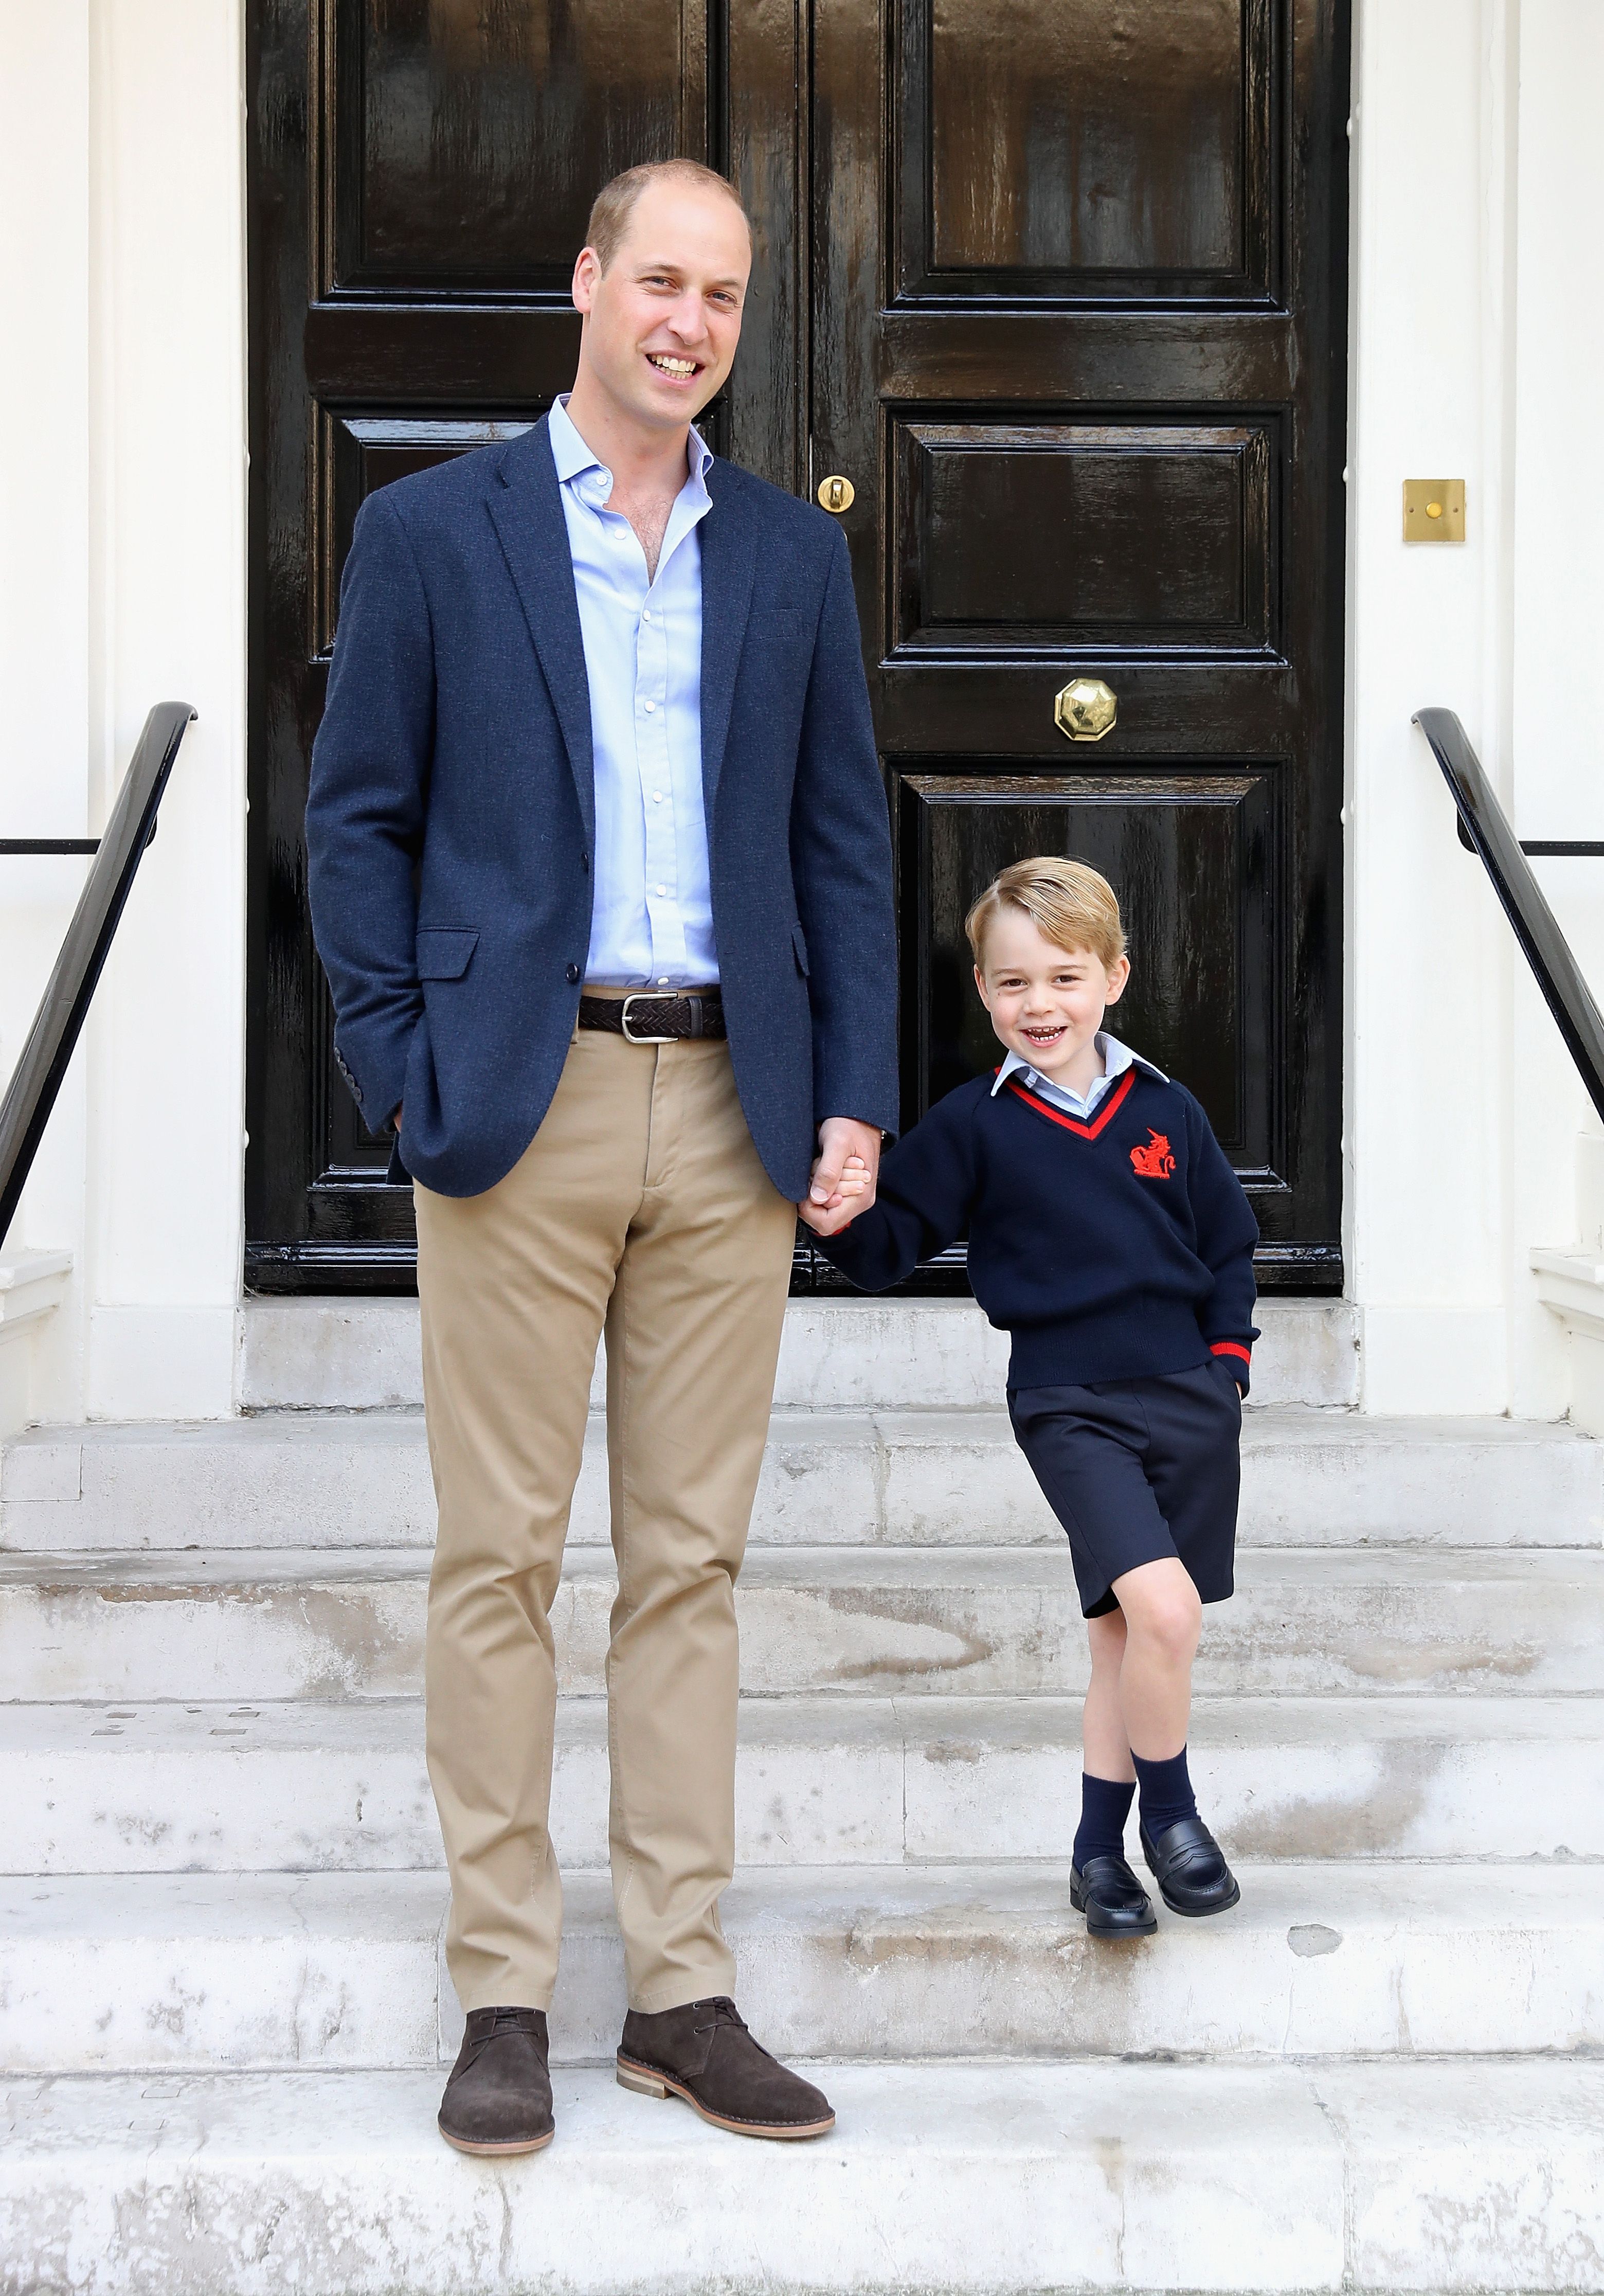 Prince William and Prince George on his first day of school on September 7, 2017 in London, England. | Photo: Getty Images